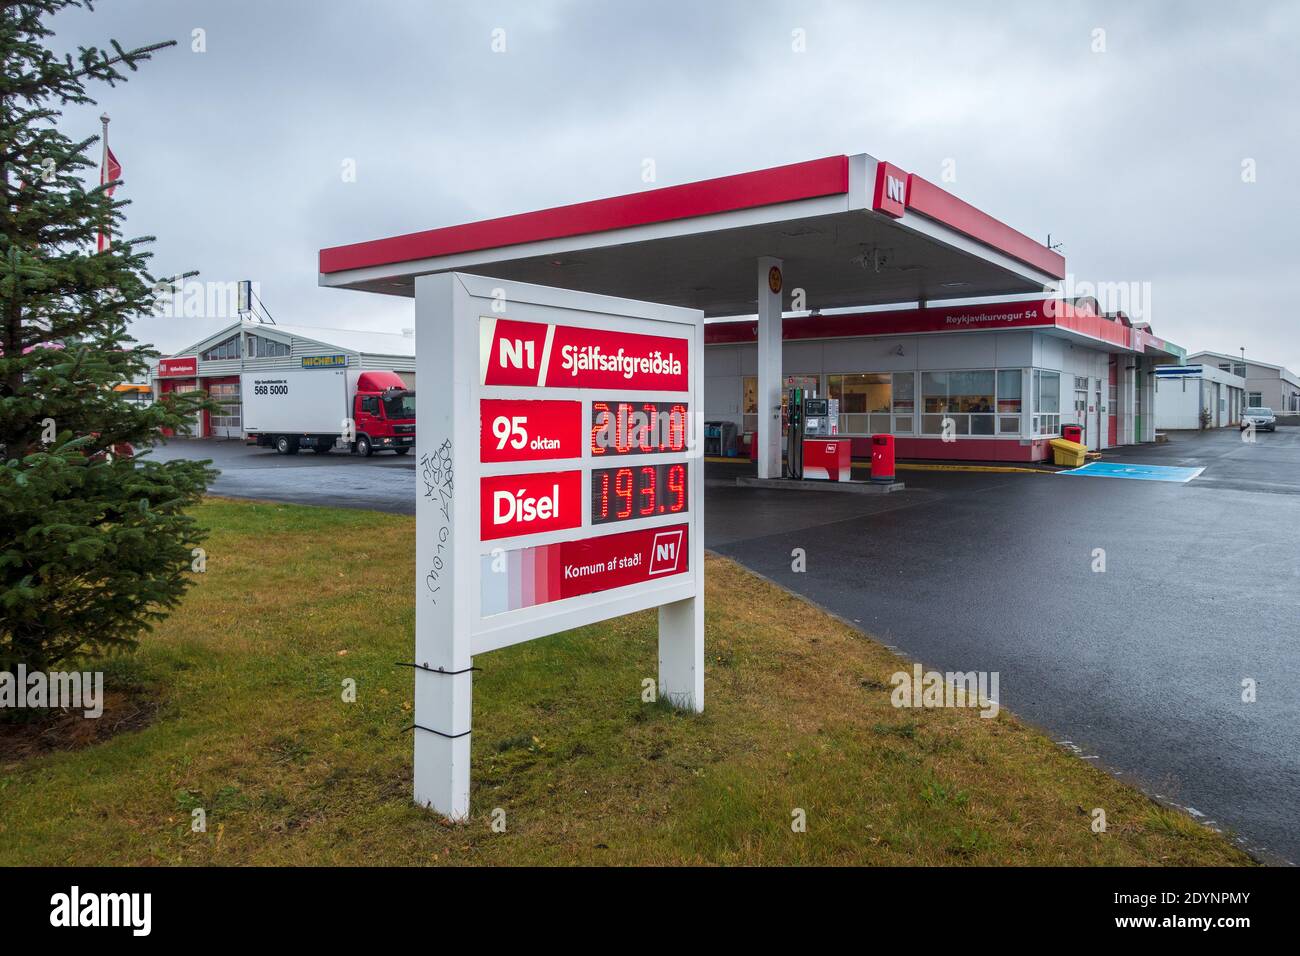 Gasoline Prices At The N1 Filling Petrol Gas Station Service Centre In Hafnarfjordur Iceland October 2017 Stock Photo